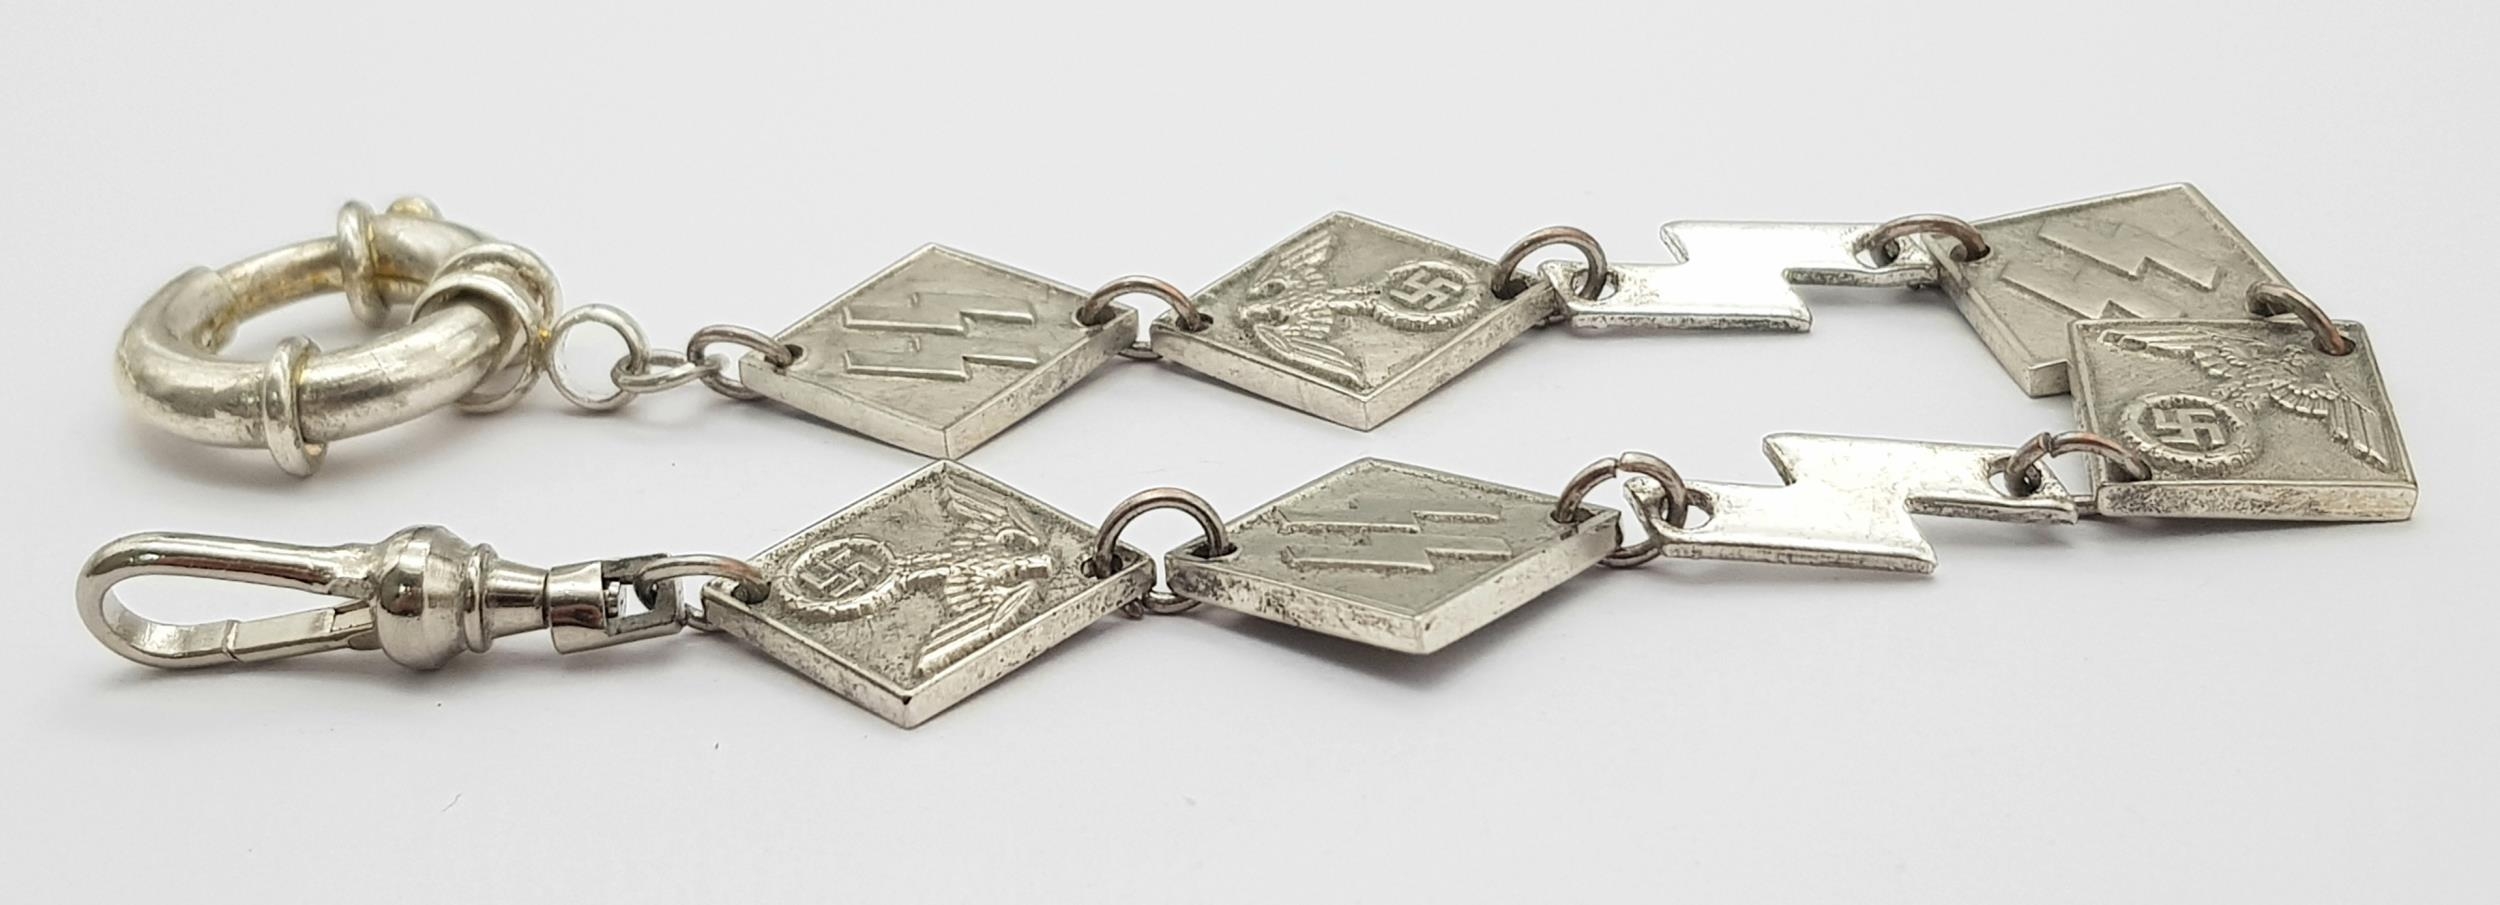 3rd Reich Patriotic Silver-Plated Watch Chain. - Image 4 of 4